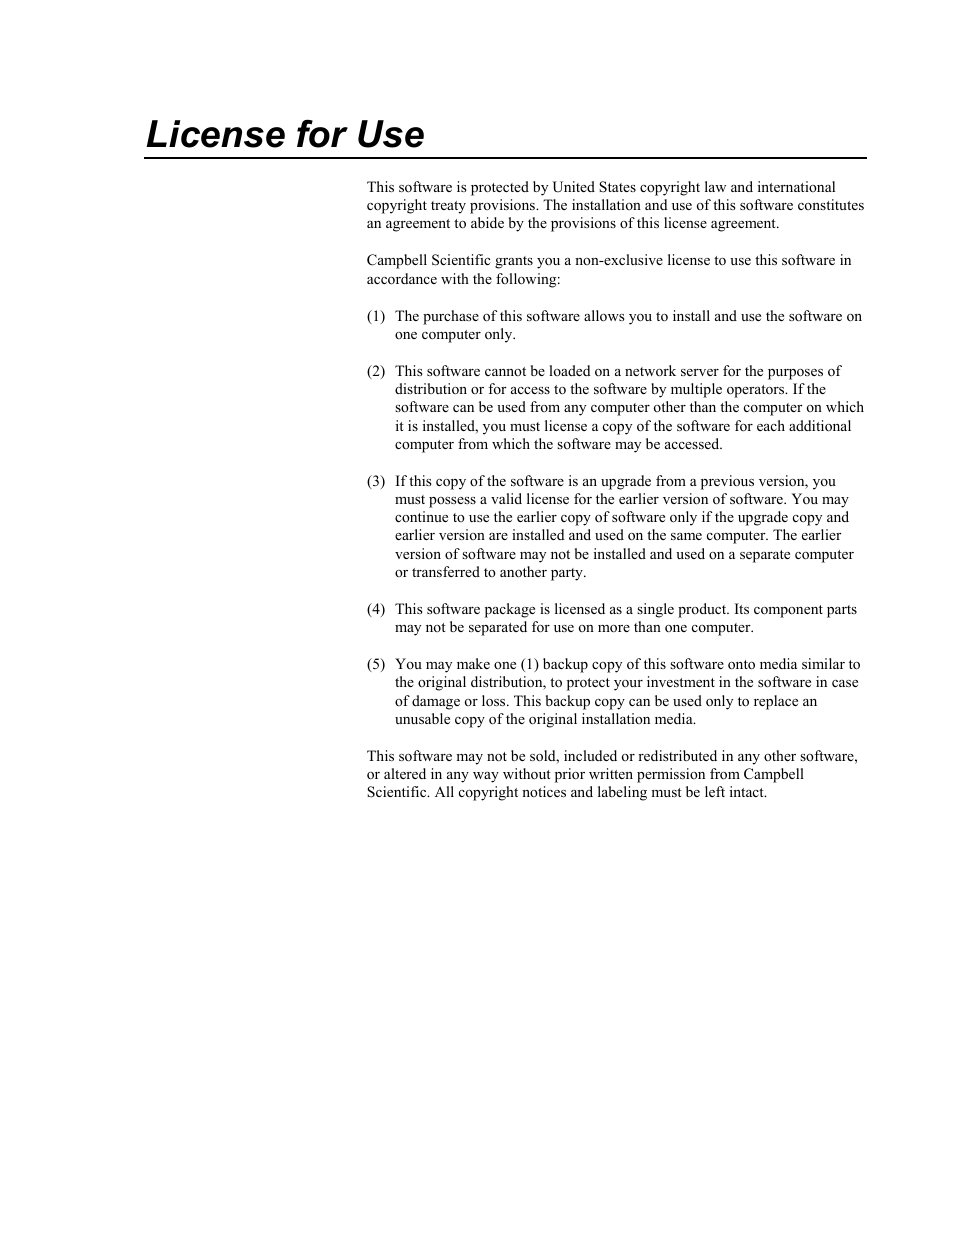 License for use | Campbell Scientific RTMC Web Server User Manual | Page 3 / 12